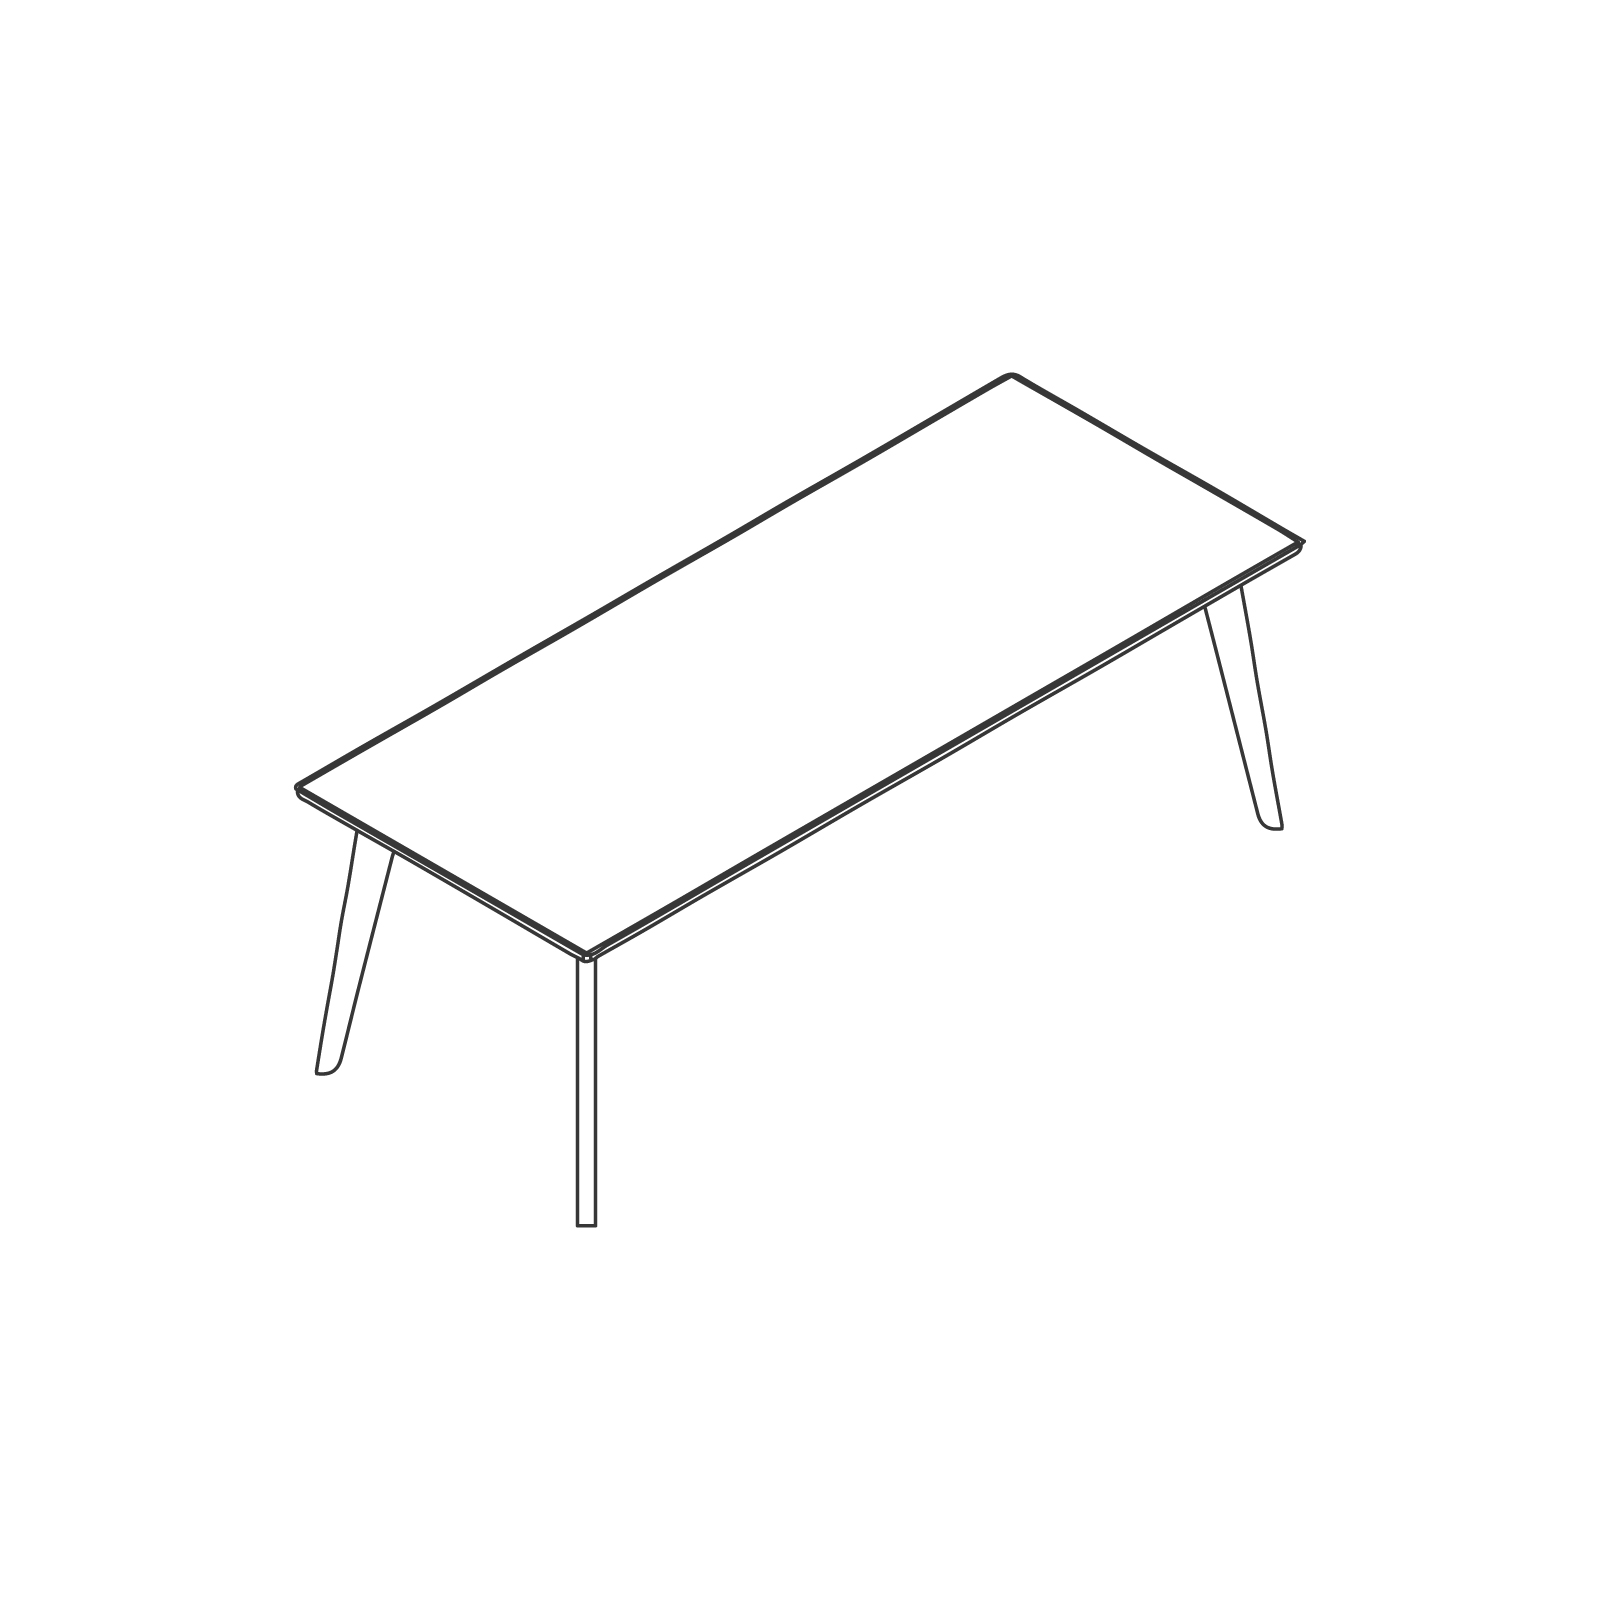 A line drawing of Dalby Conference Table–Rectangular.